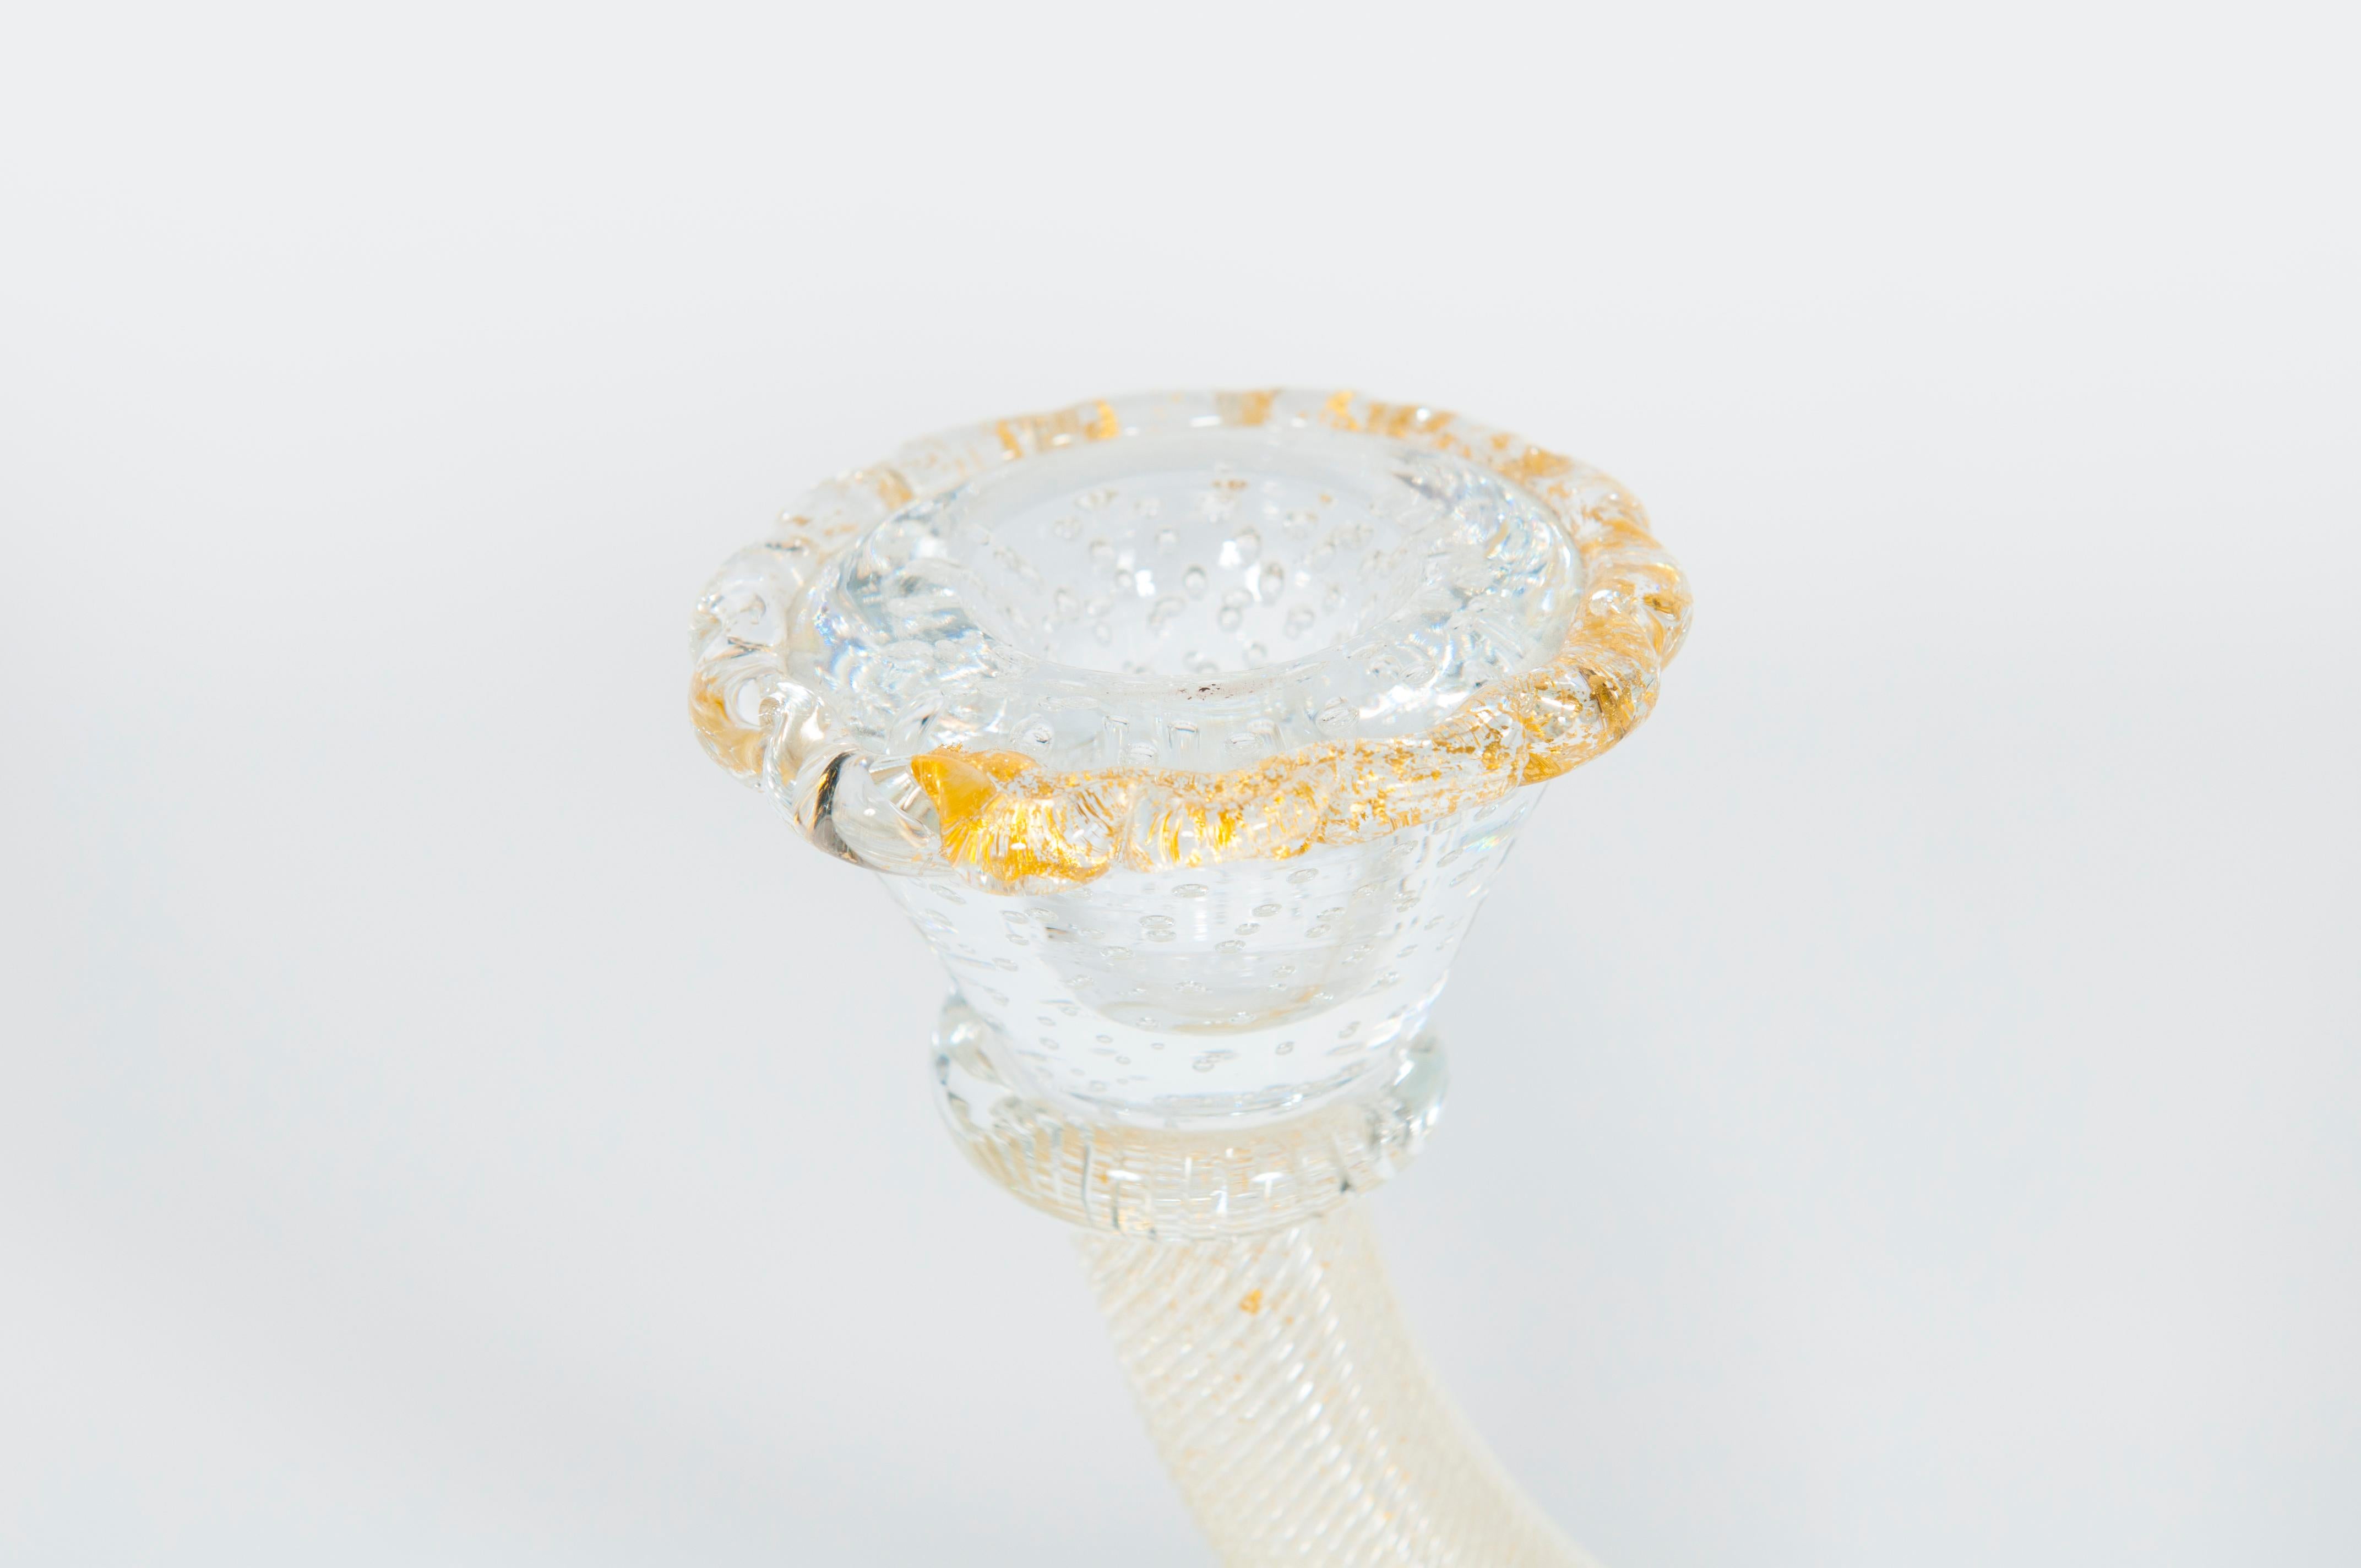 Murano Glass Torciglione Candle Holder with Submerged Gold Attributed to Seguso In Excellent Condition For Sale In Villaverla, IT